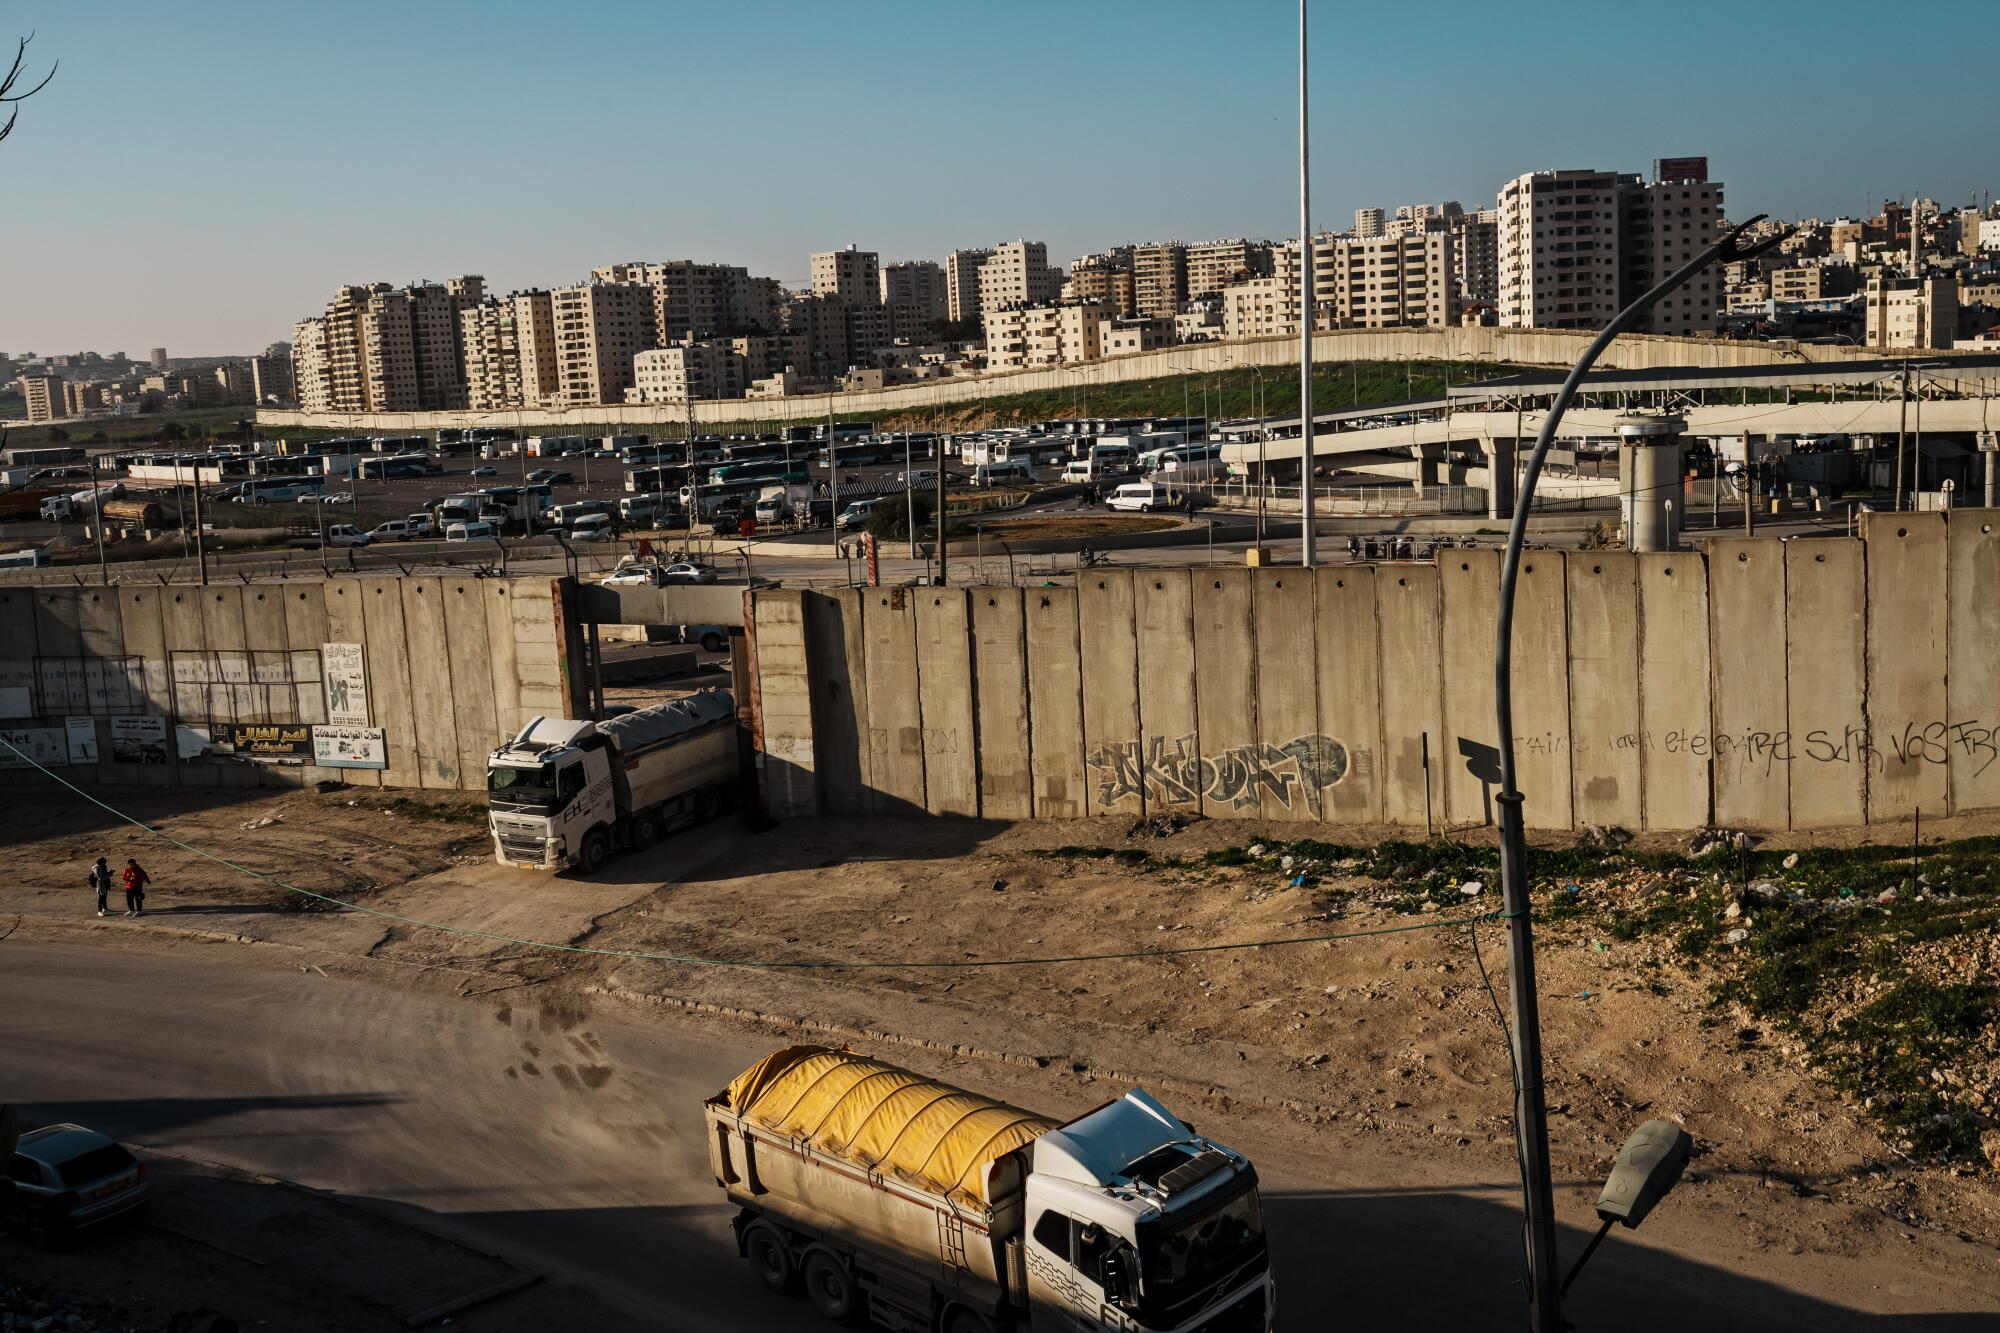 Commercial trucks move along at rush hour onto the thoroughfare highway 60, near the Qalandiya checkpoint.